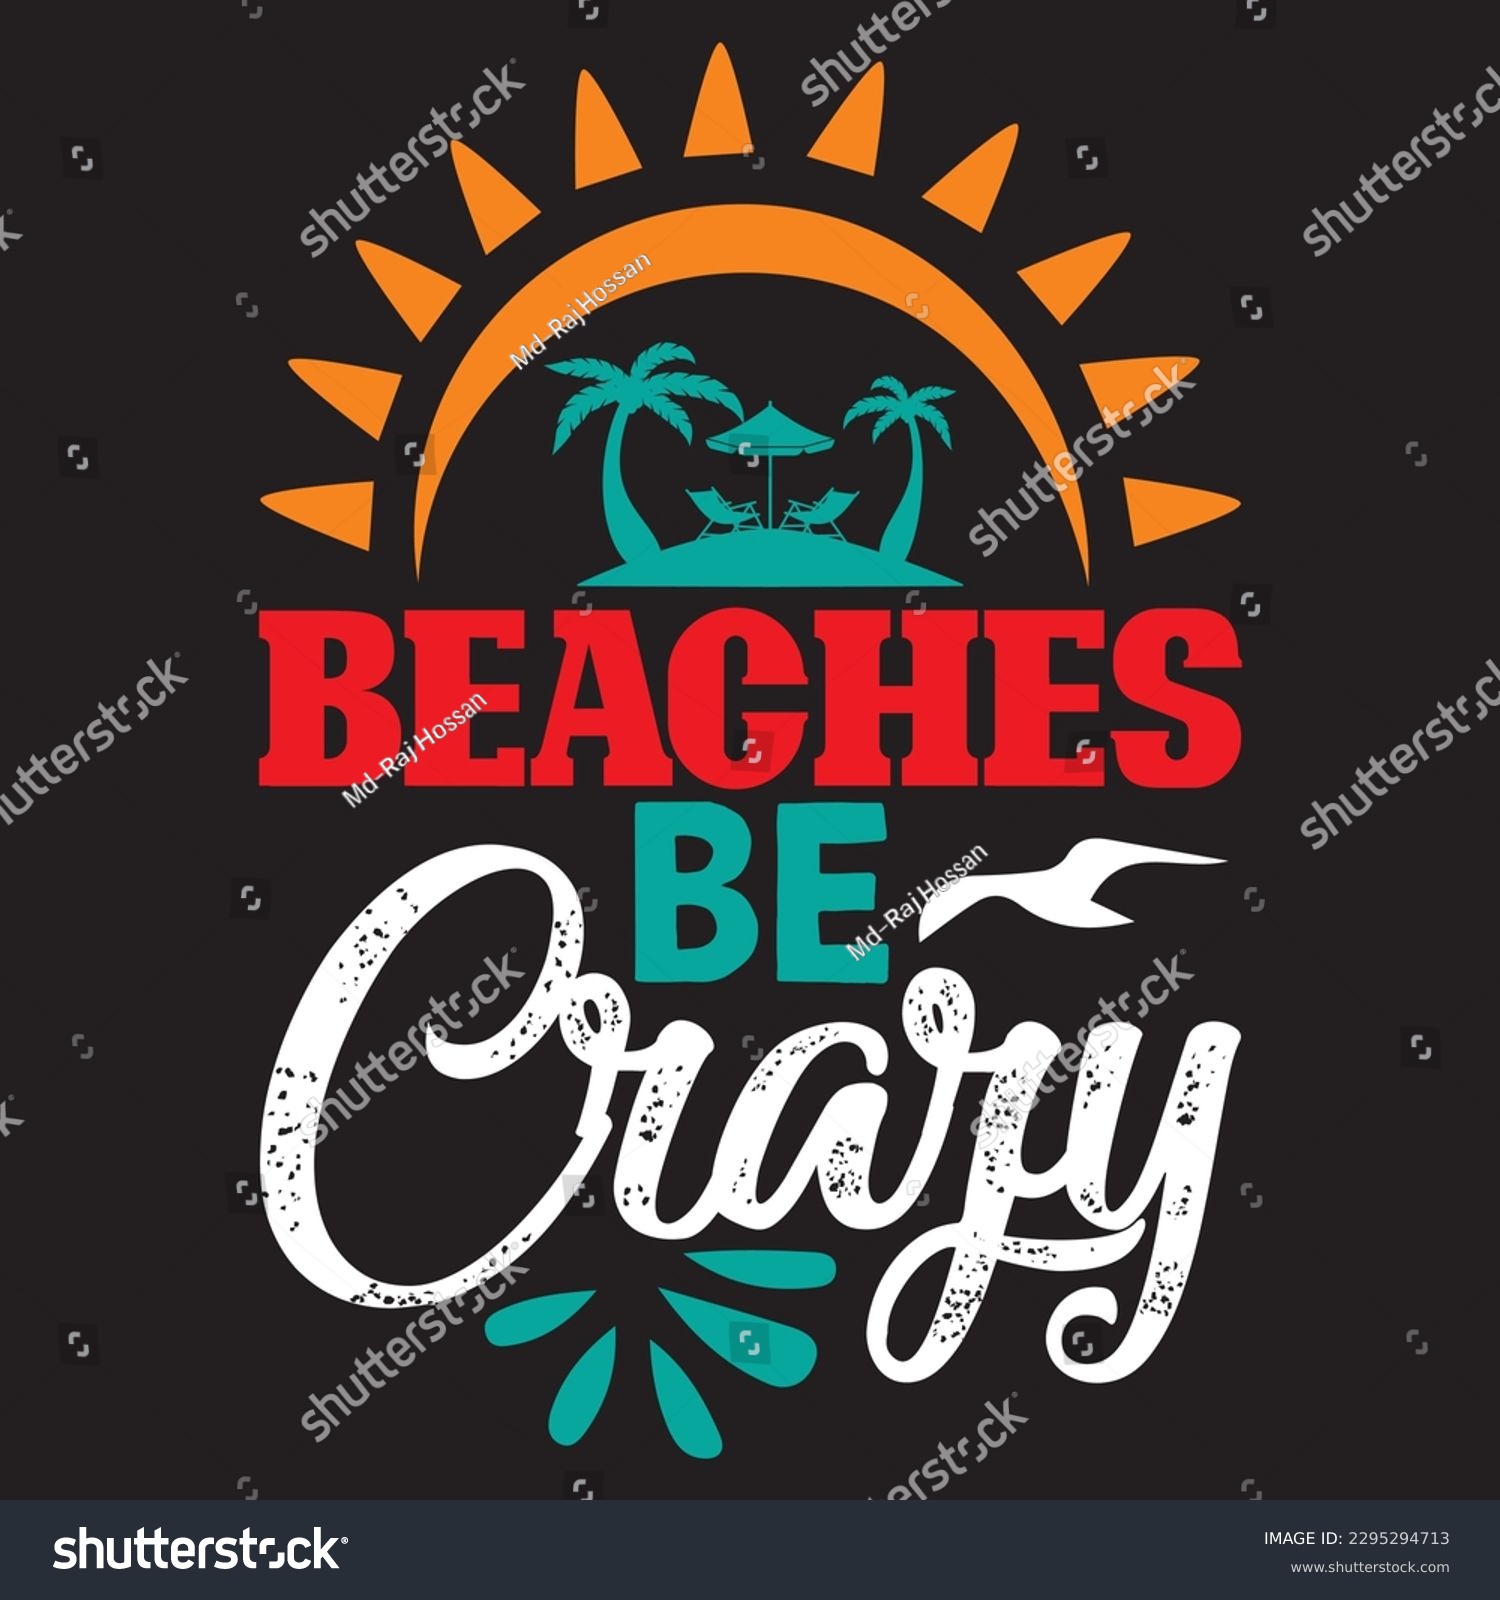 SVG of Beaches Be Crazy T-shirt Design Vector File svg